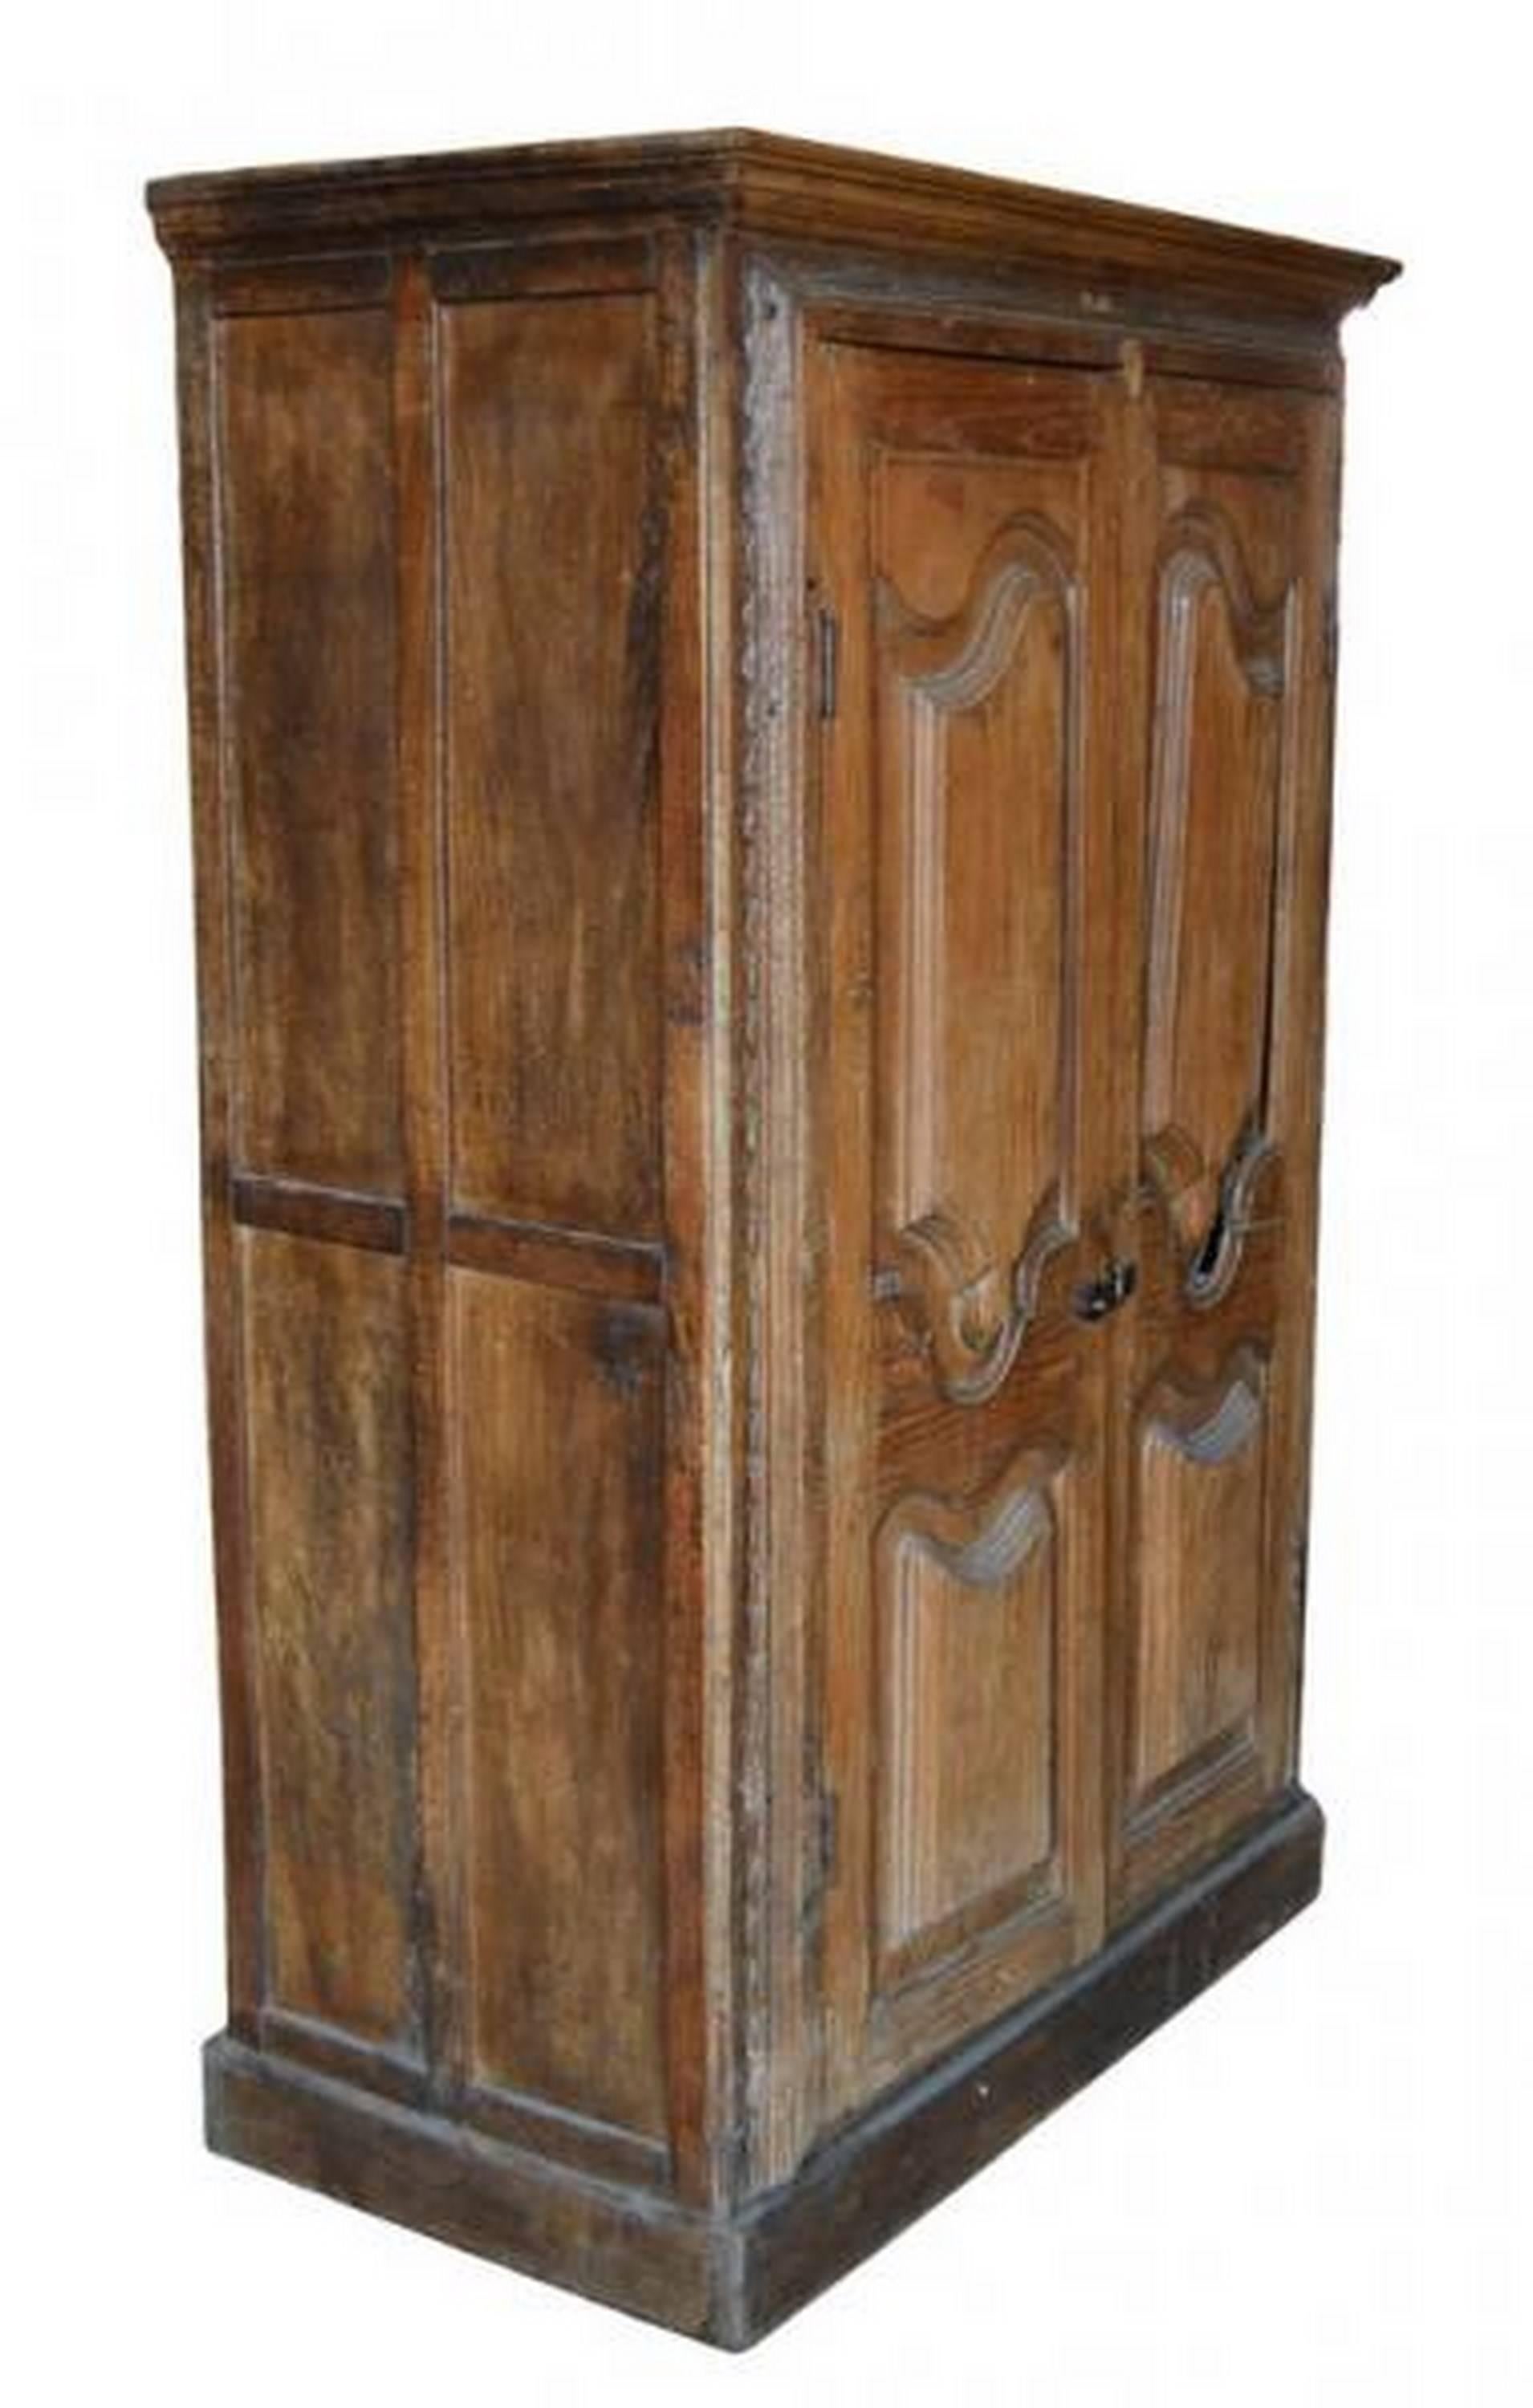 A 19th century tall rustic cabinet with carved doors made in India. This tall cabinet features two doors surmounted by a cornice while the piece itself sits on a large plinth.  The doors display carved, curved patterns and open thanks to metal hasp